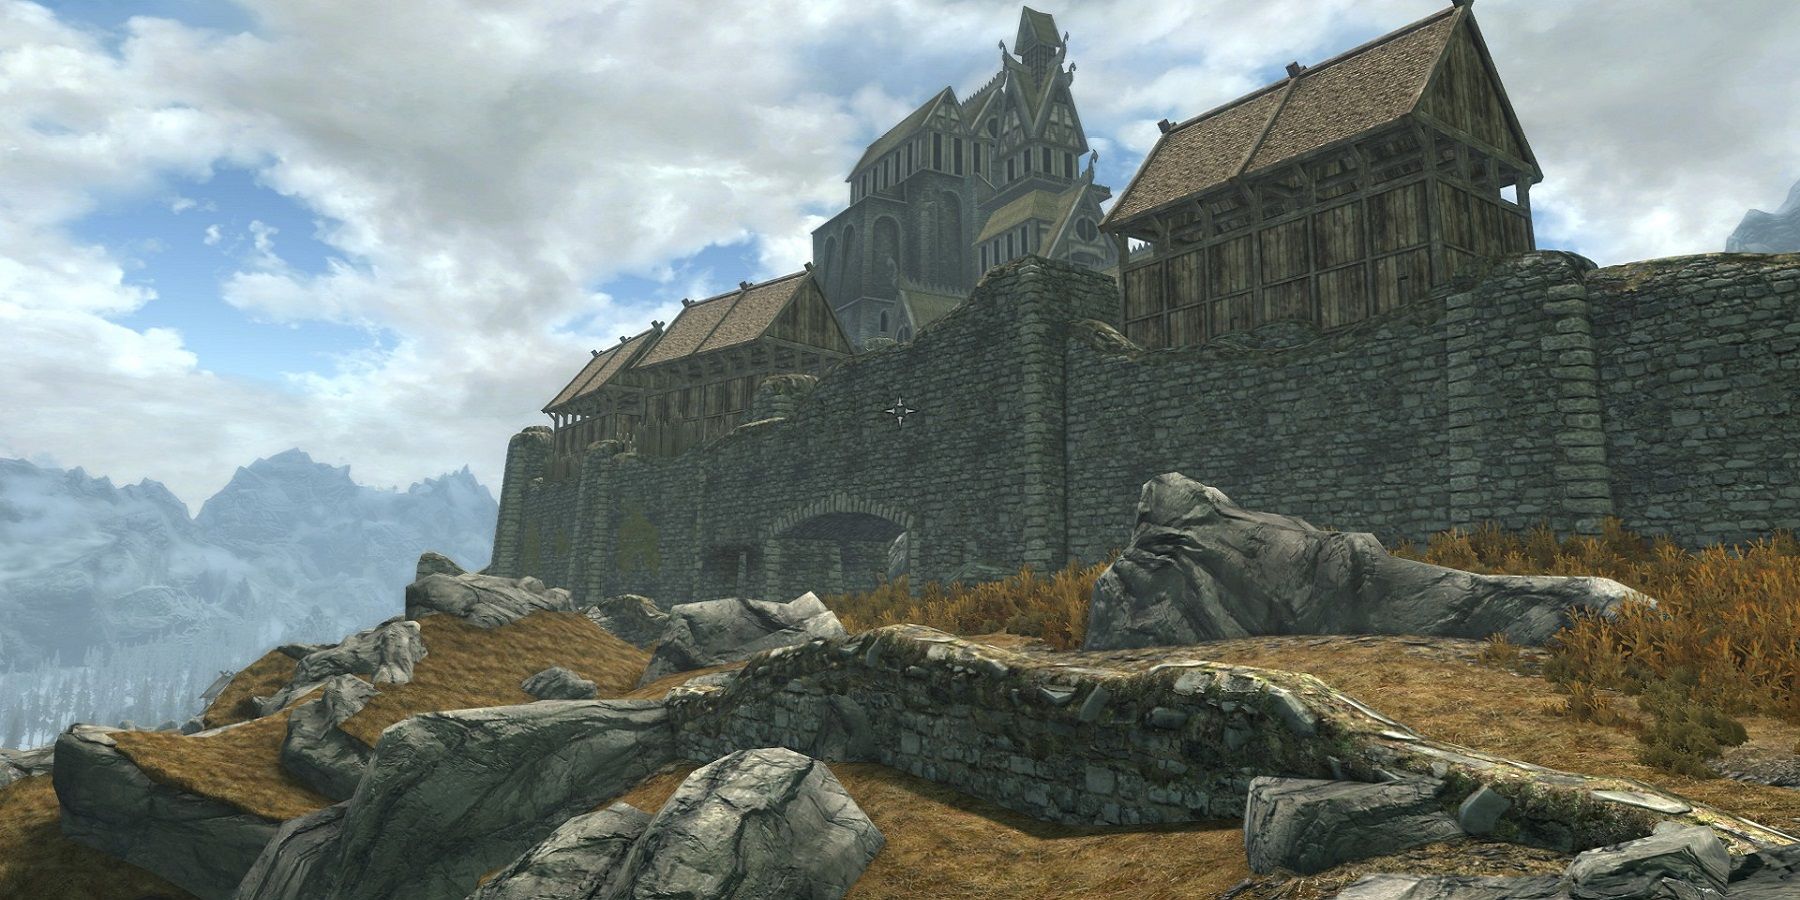 Image from Skyrim showing the outer wall of the city of Whiterun.